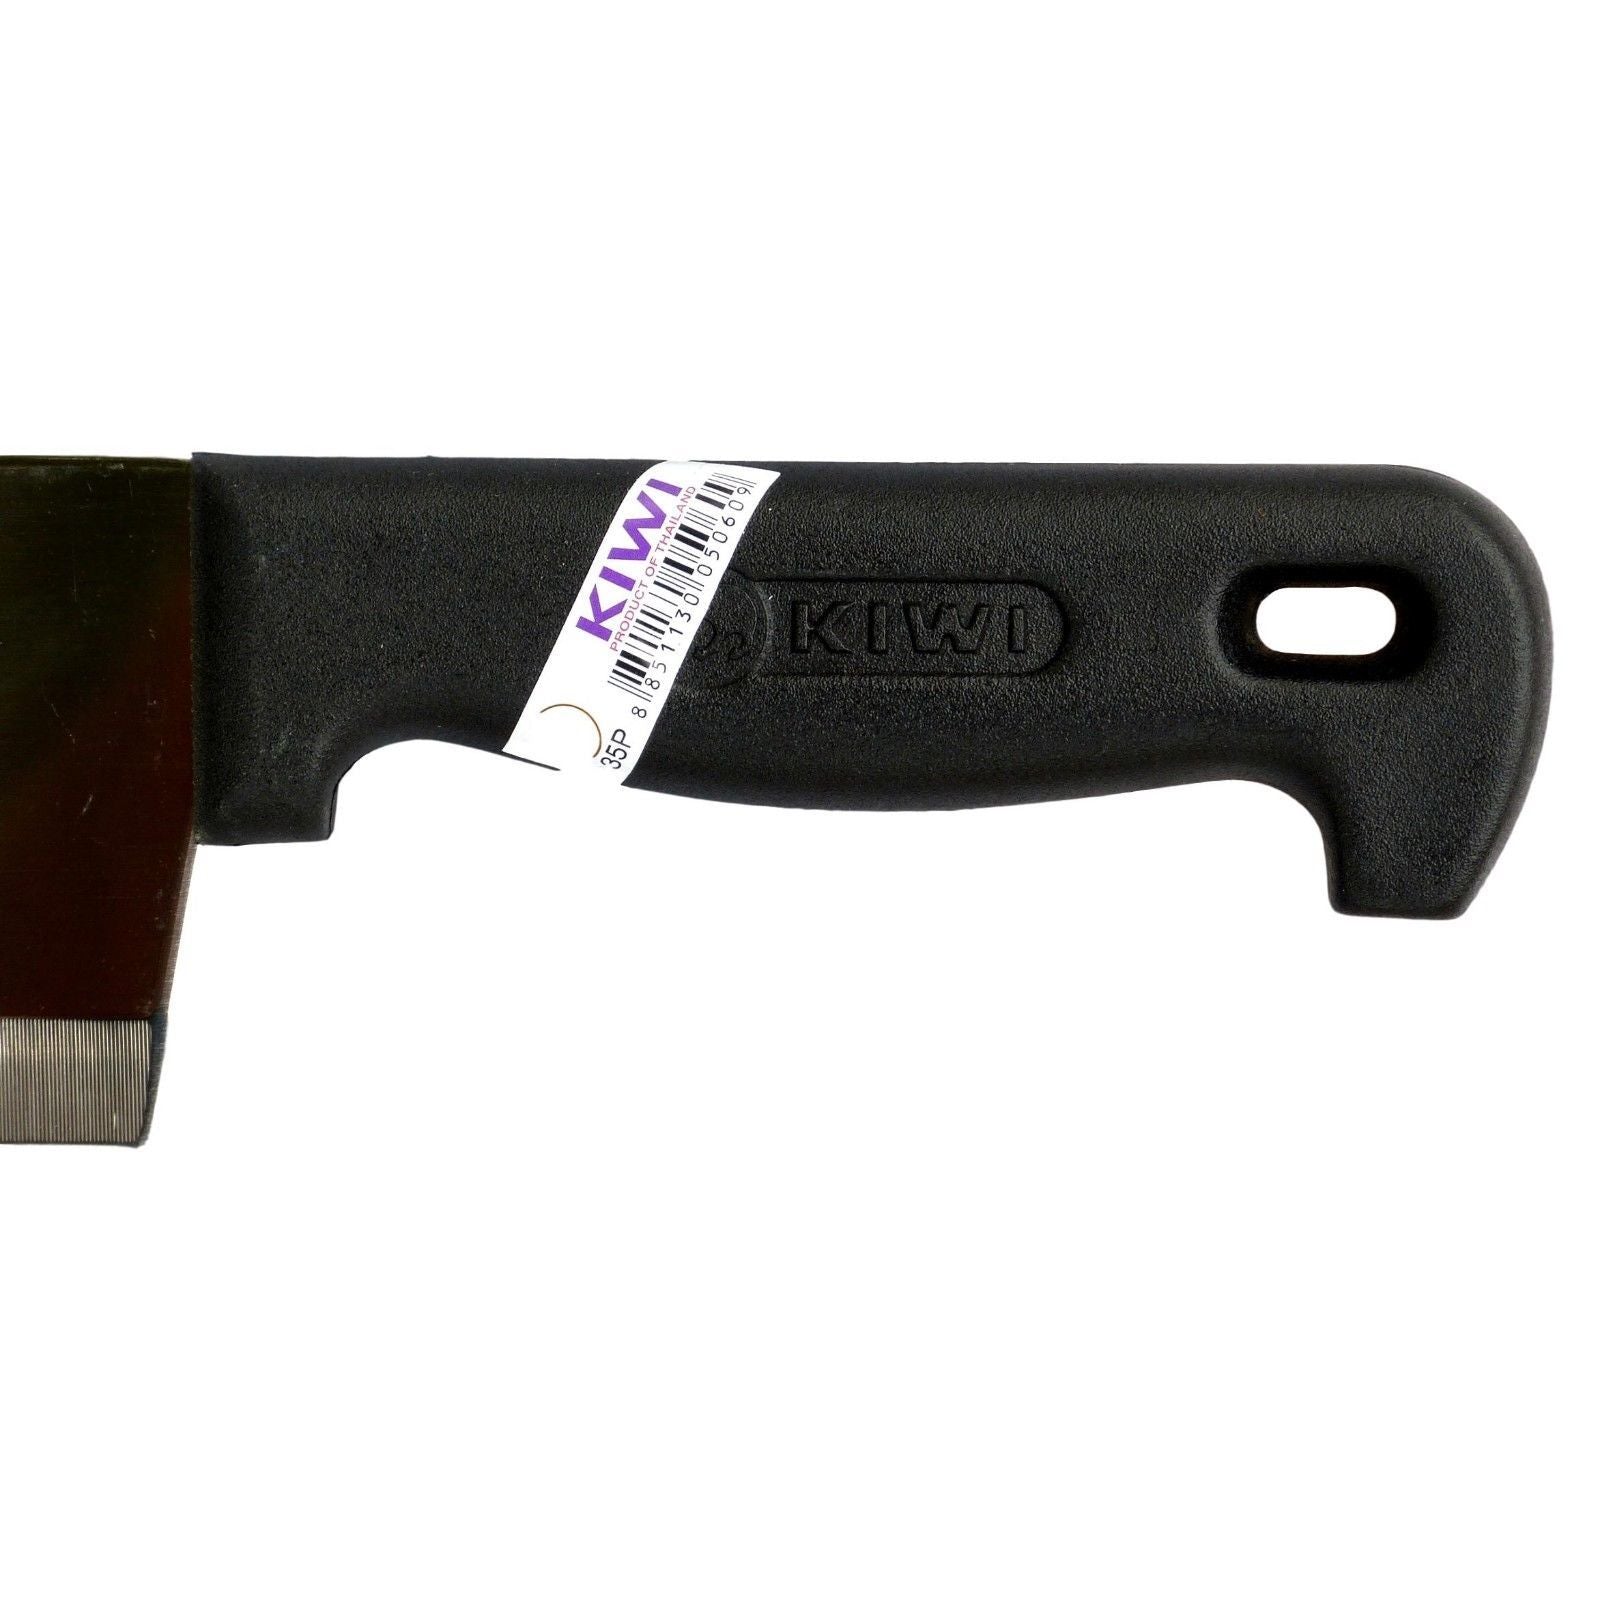 Kiwi Stainless Steel 6.5 inch Cleaver Knife with Non Slip Handle No. 835p